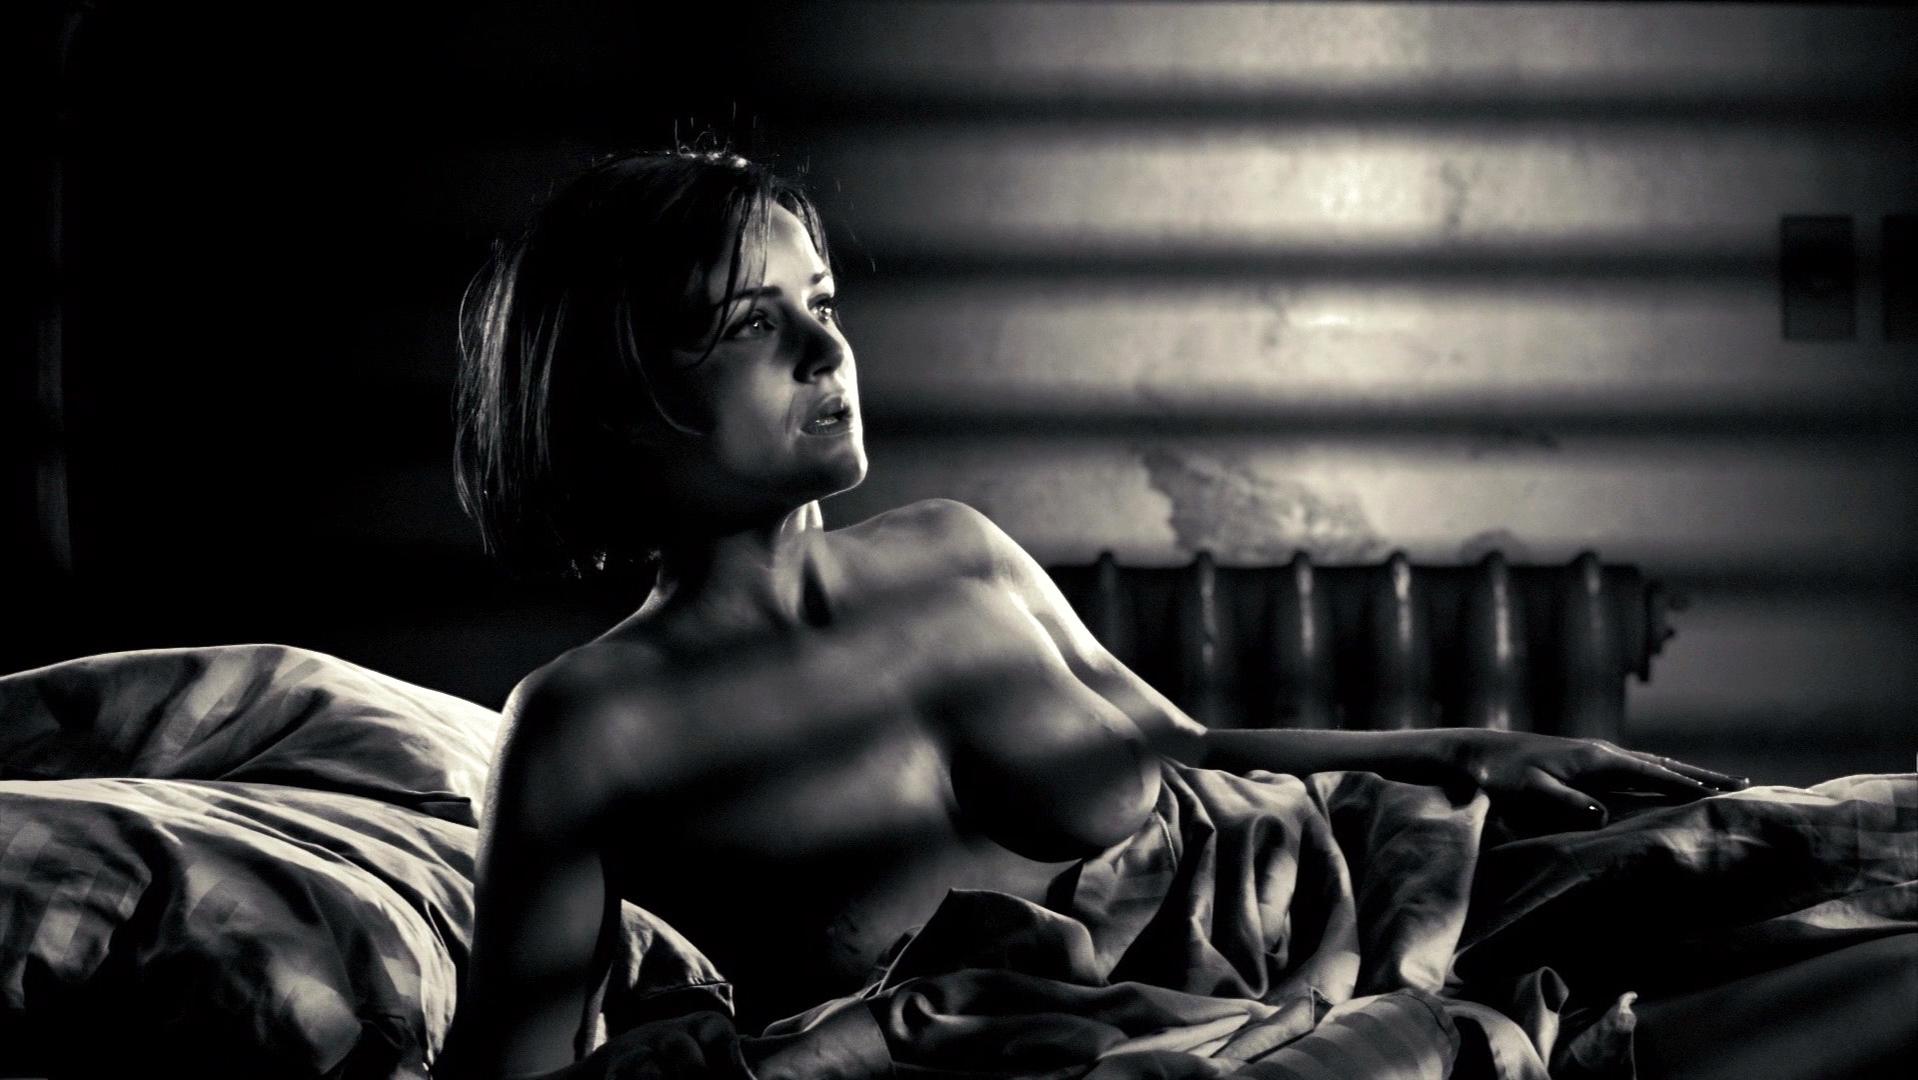 Carla Gugino in nude scene from Sin City which was released in 2005. 